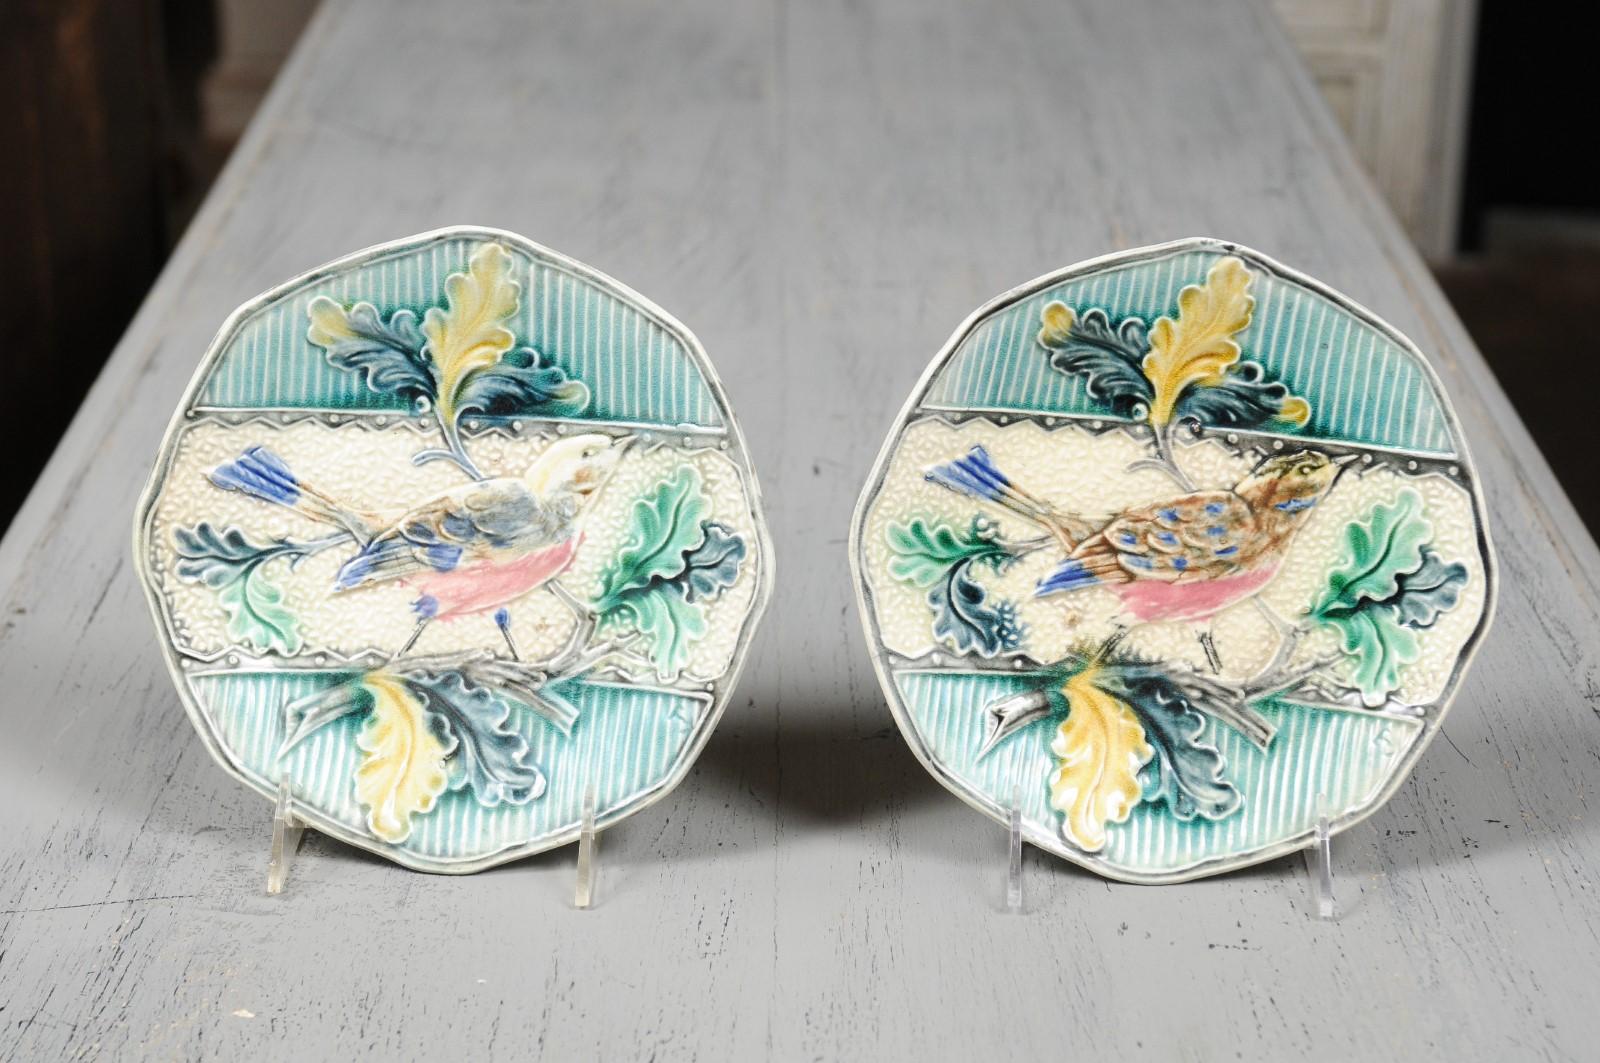 Two French Majolica decorative plates from the 19th century depicting a bird perched on an oak tree branch, priced and sold individually. Born in France during the dynamic 19th century, each of these two Majolica plates features a scalloped edge,